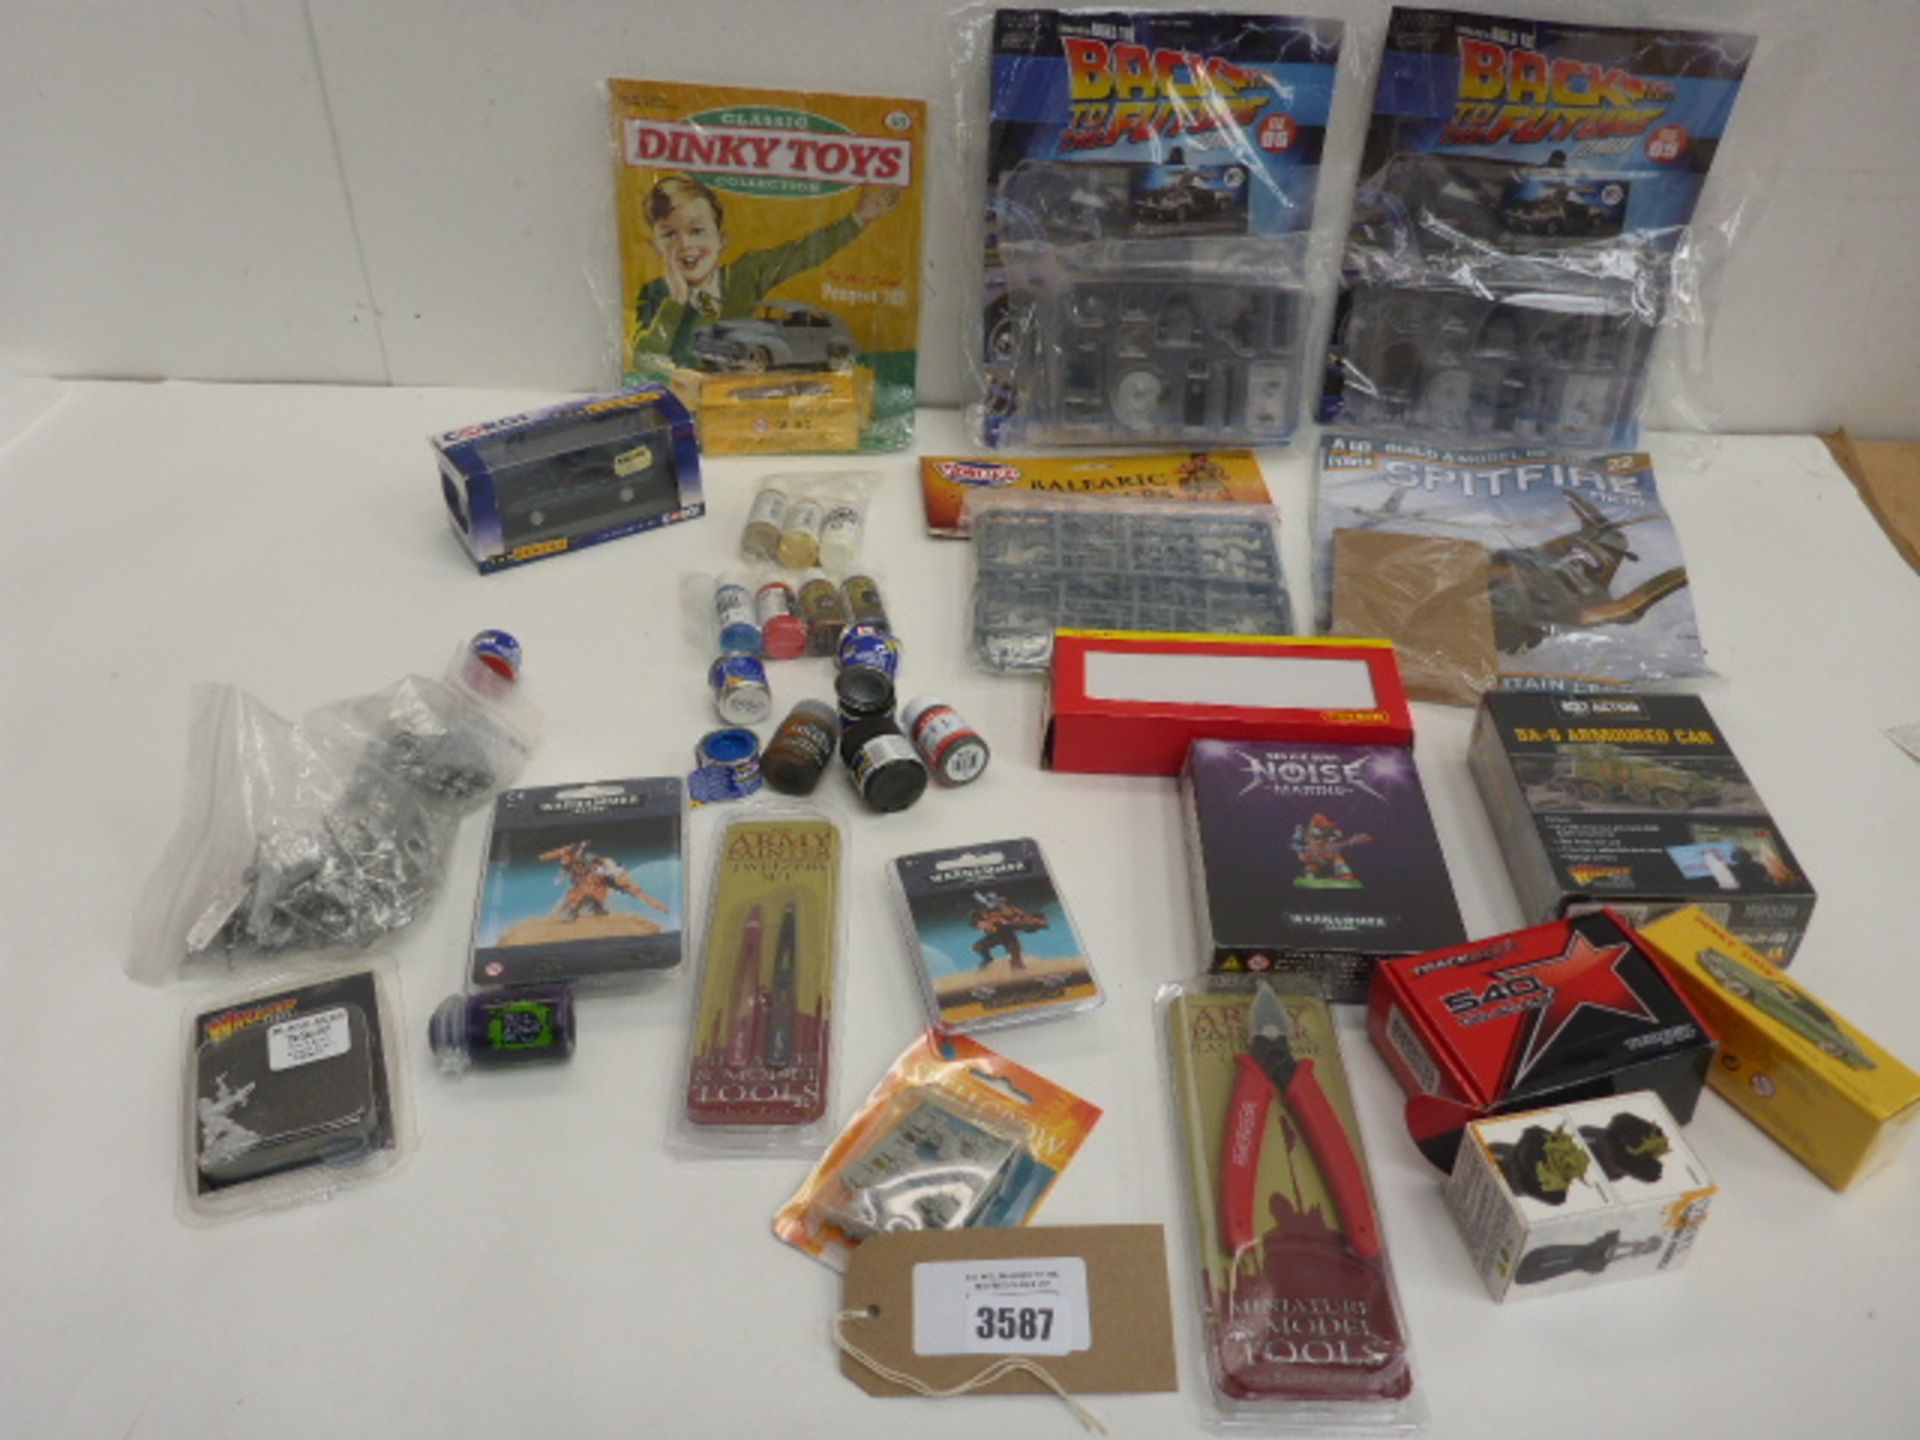 Warhammer and other model kits, figures and paints, Corgi model cars, Back to the Future